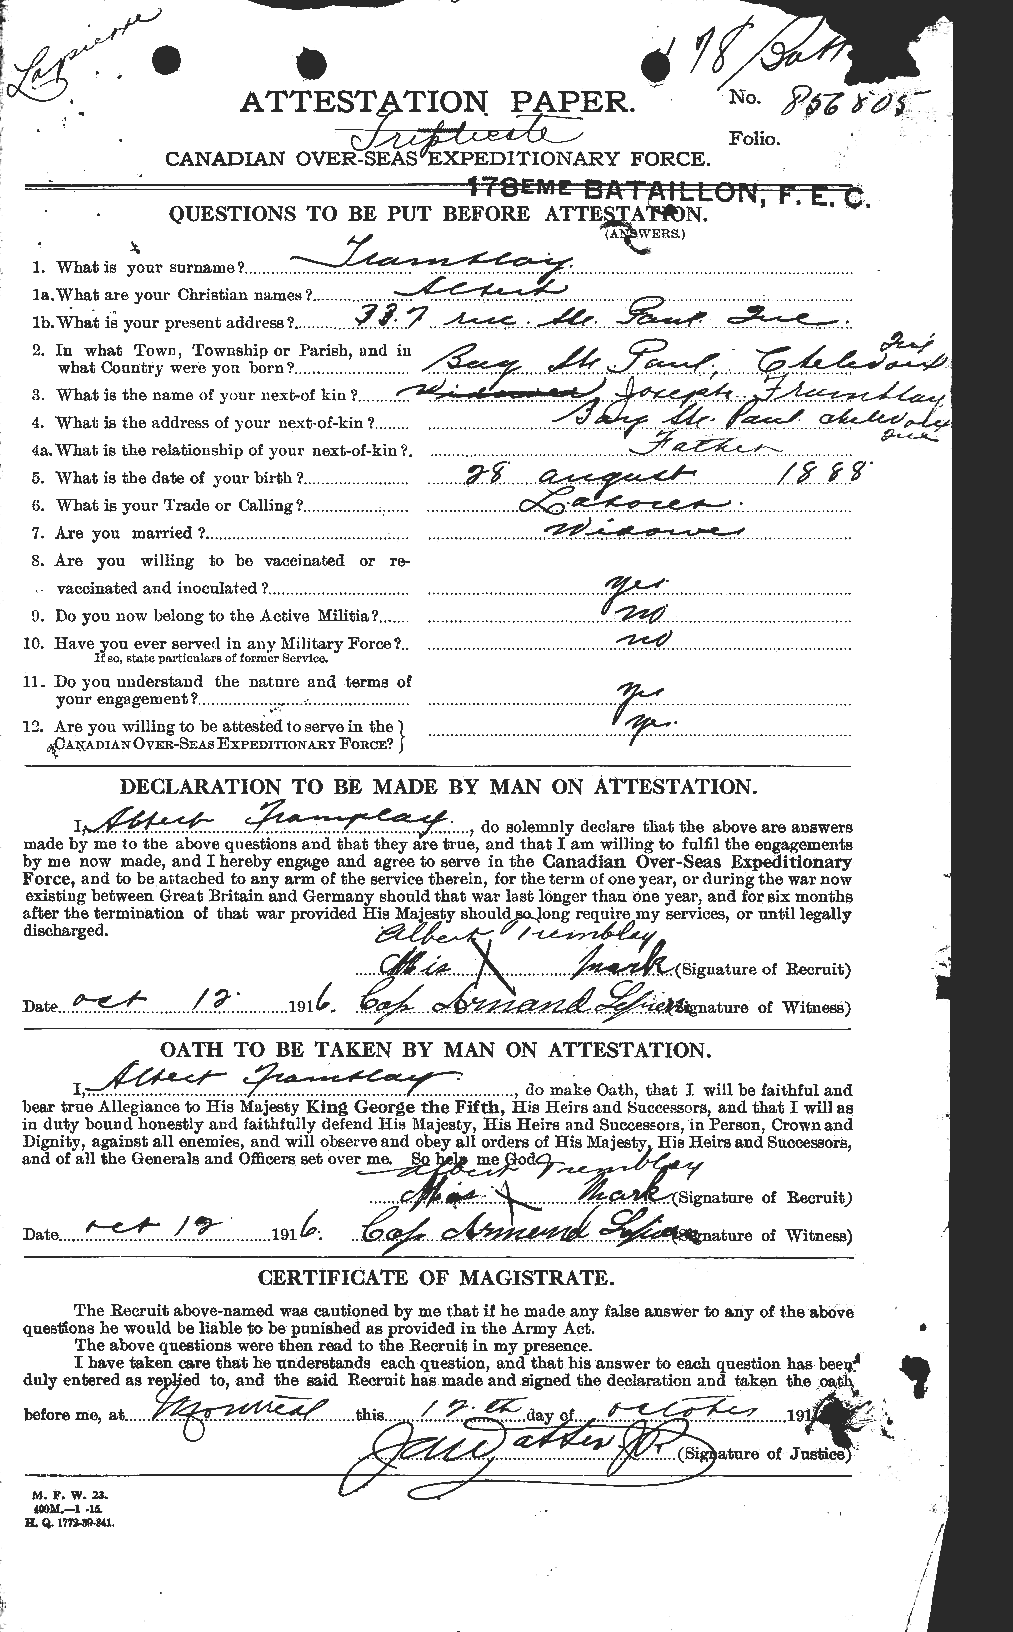 Personnel Records of the First World War - CEF 638904a